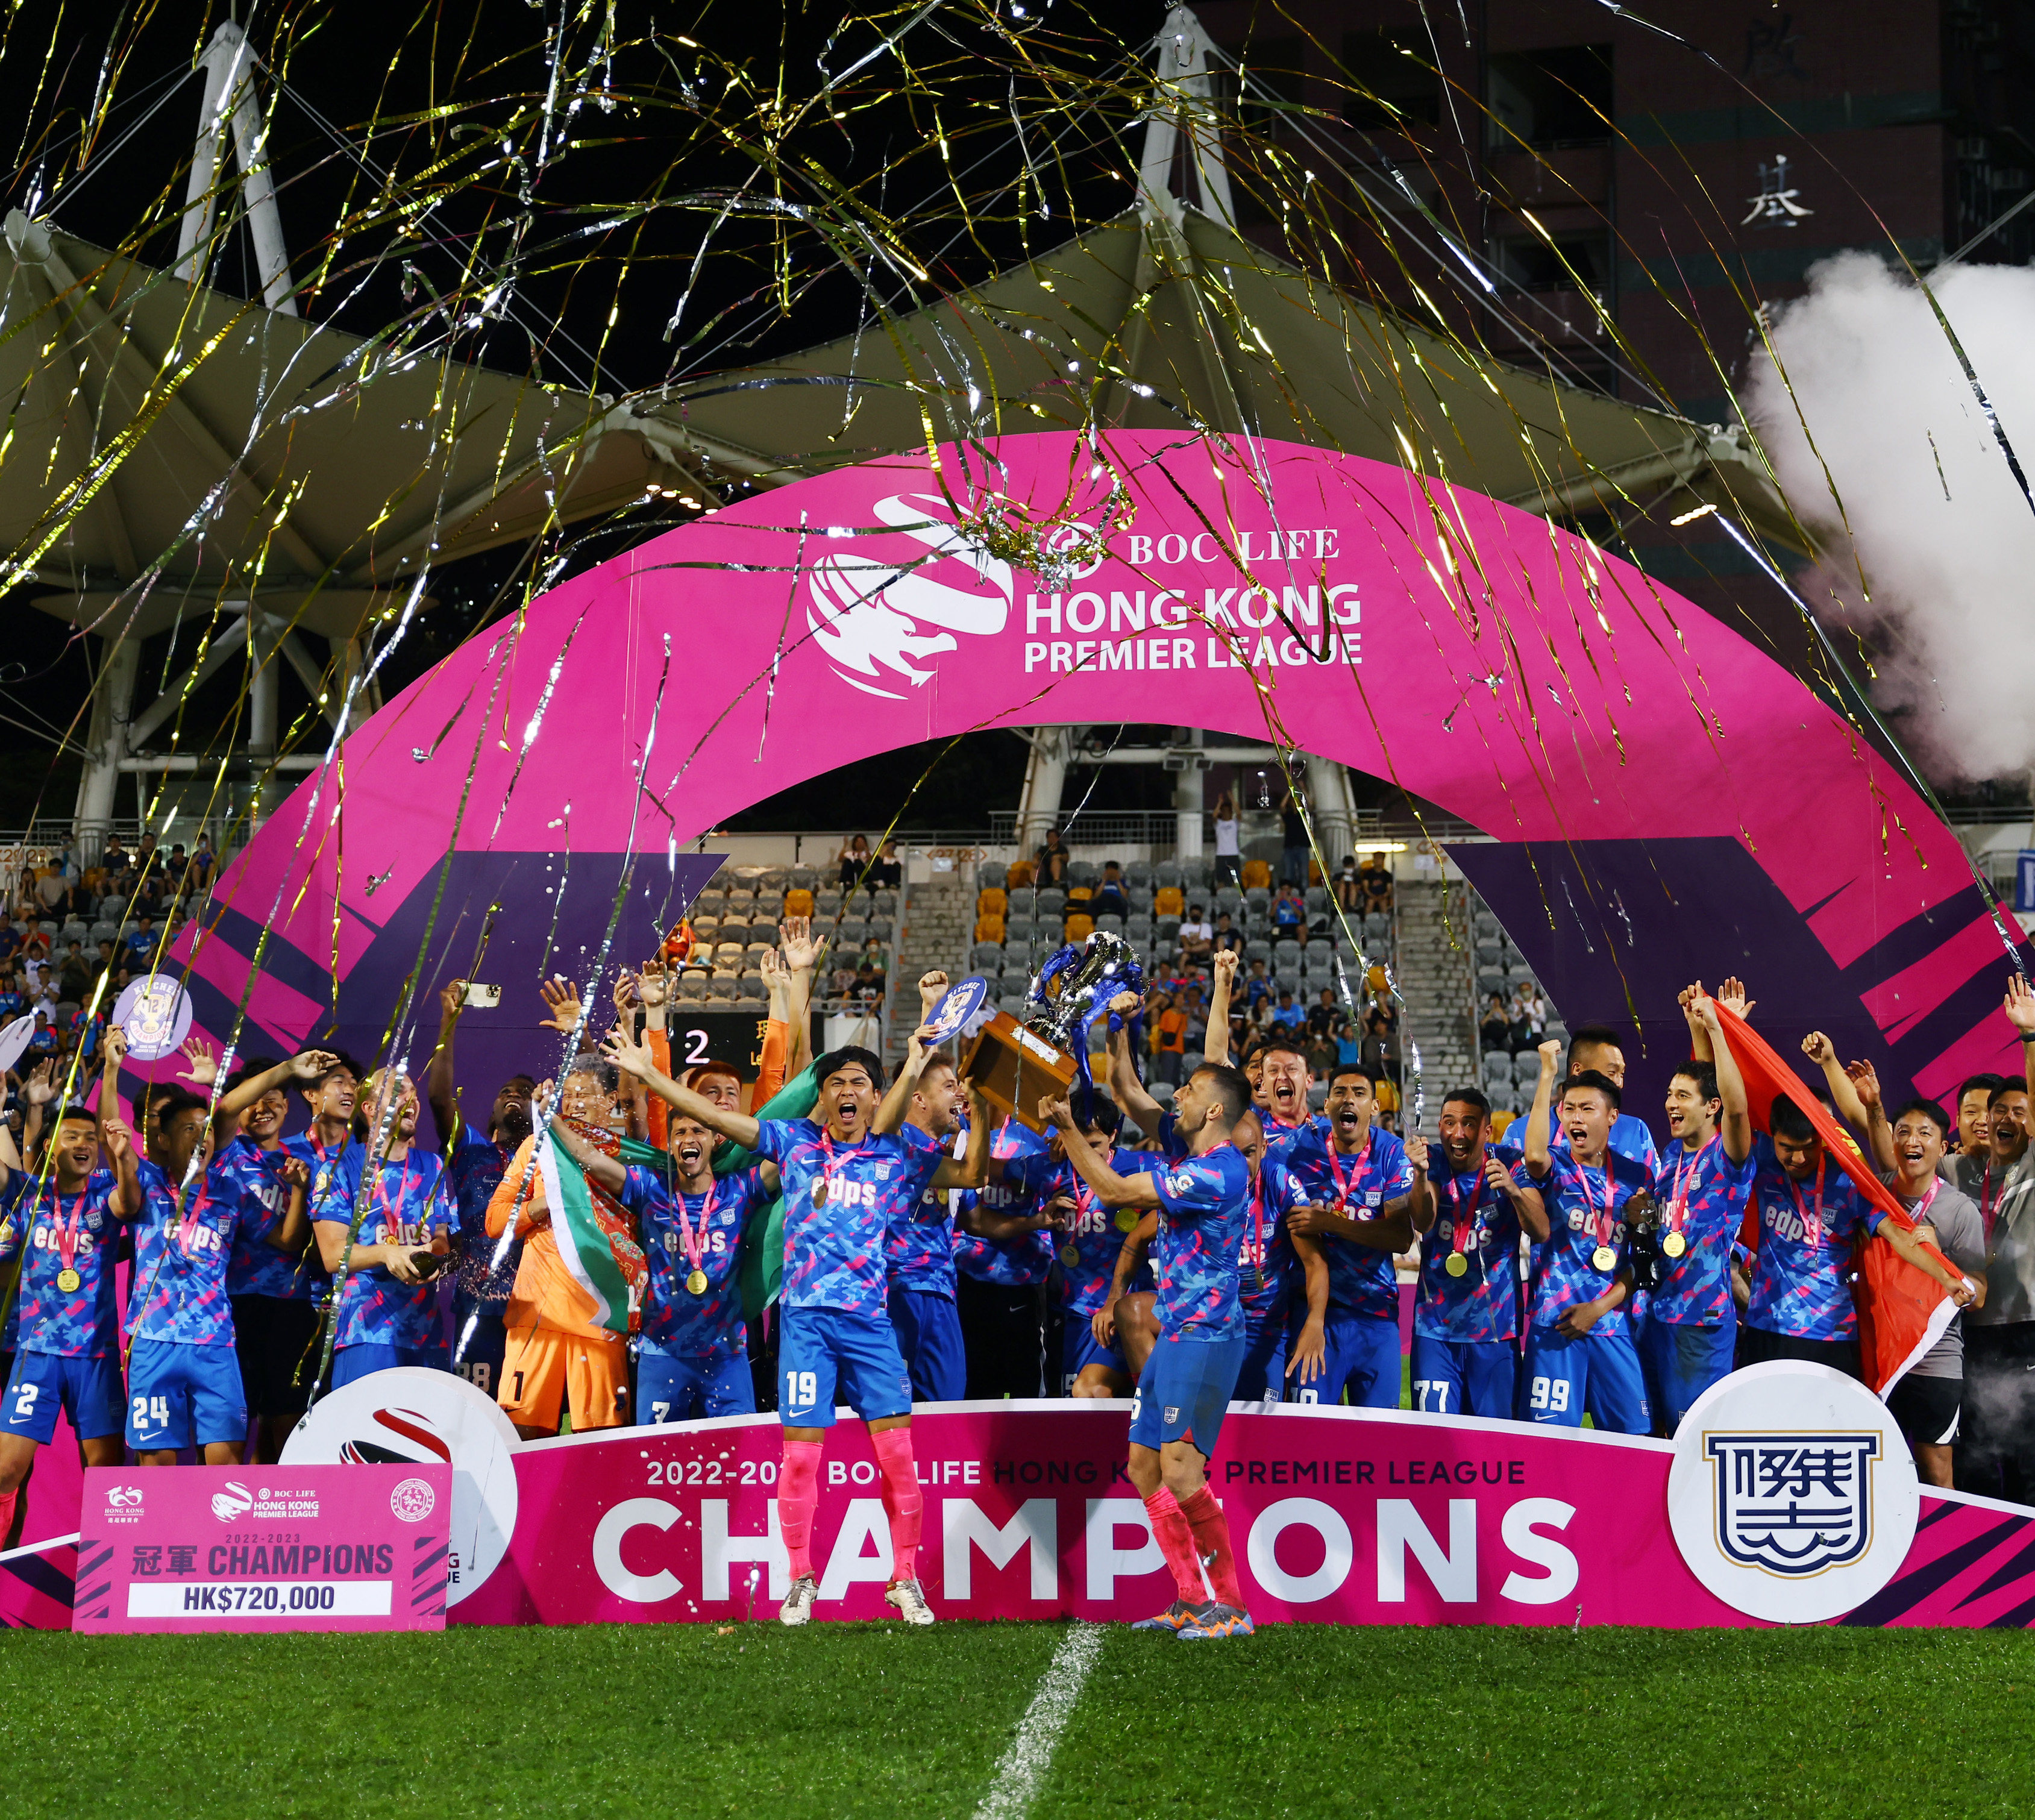 Kitchee celebrate winning the Hong Kong Premier Leagu eafter their last game against Lee Man at Mong Kok Stadium on May 7. Photo: Dickson Lee